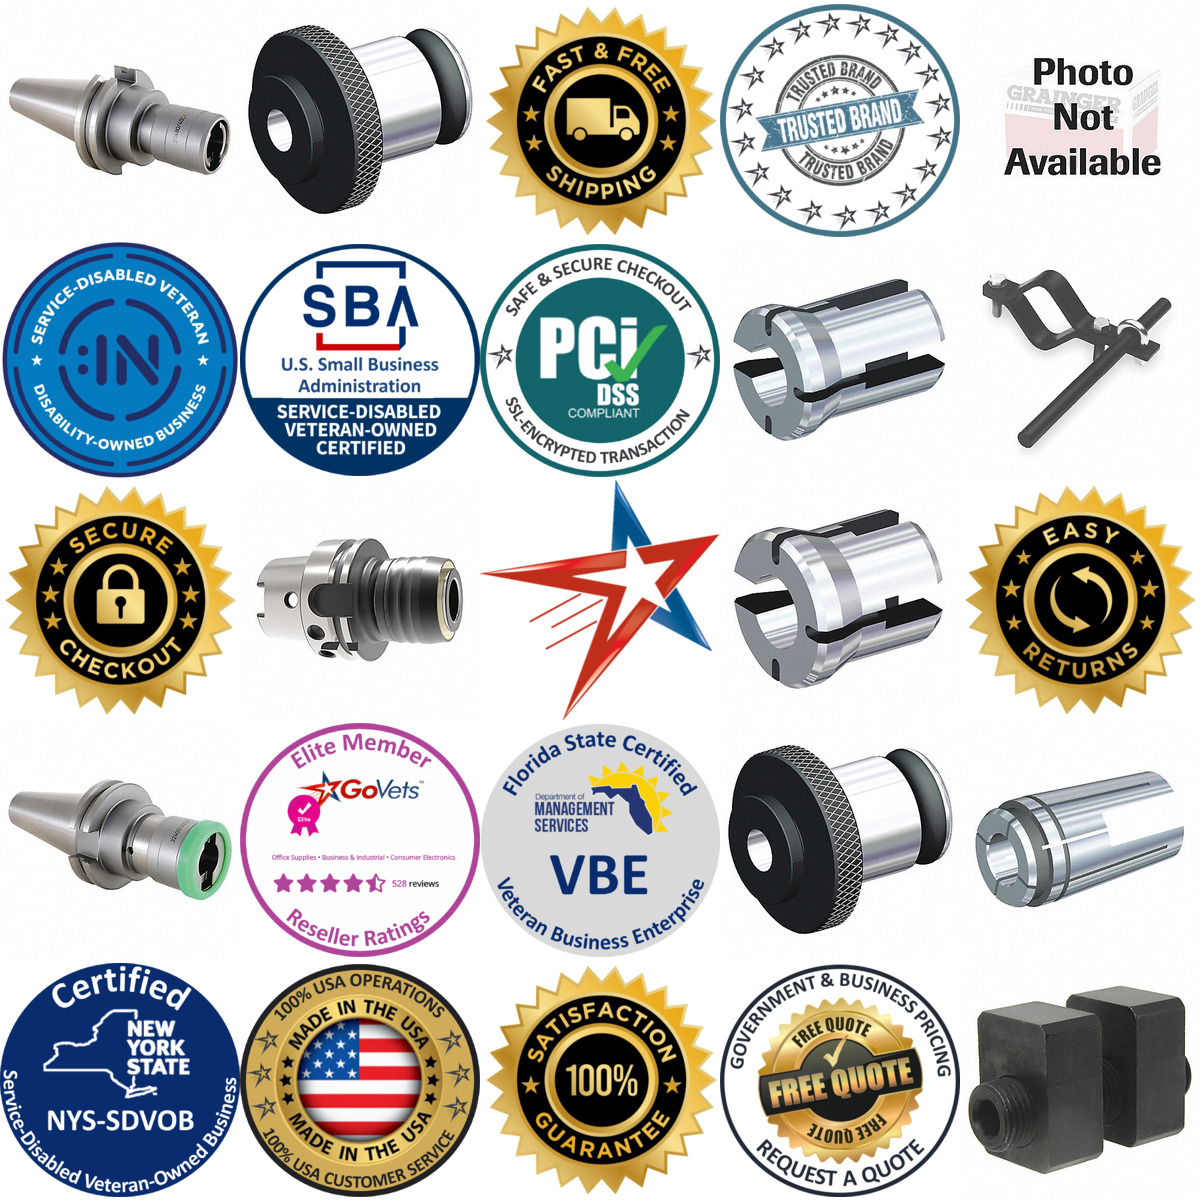 A selection of Toolholding and Tooling Systems   Tapping Heads an products on GoVets